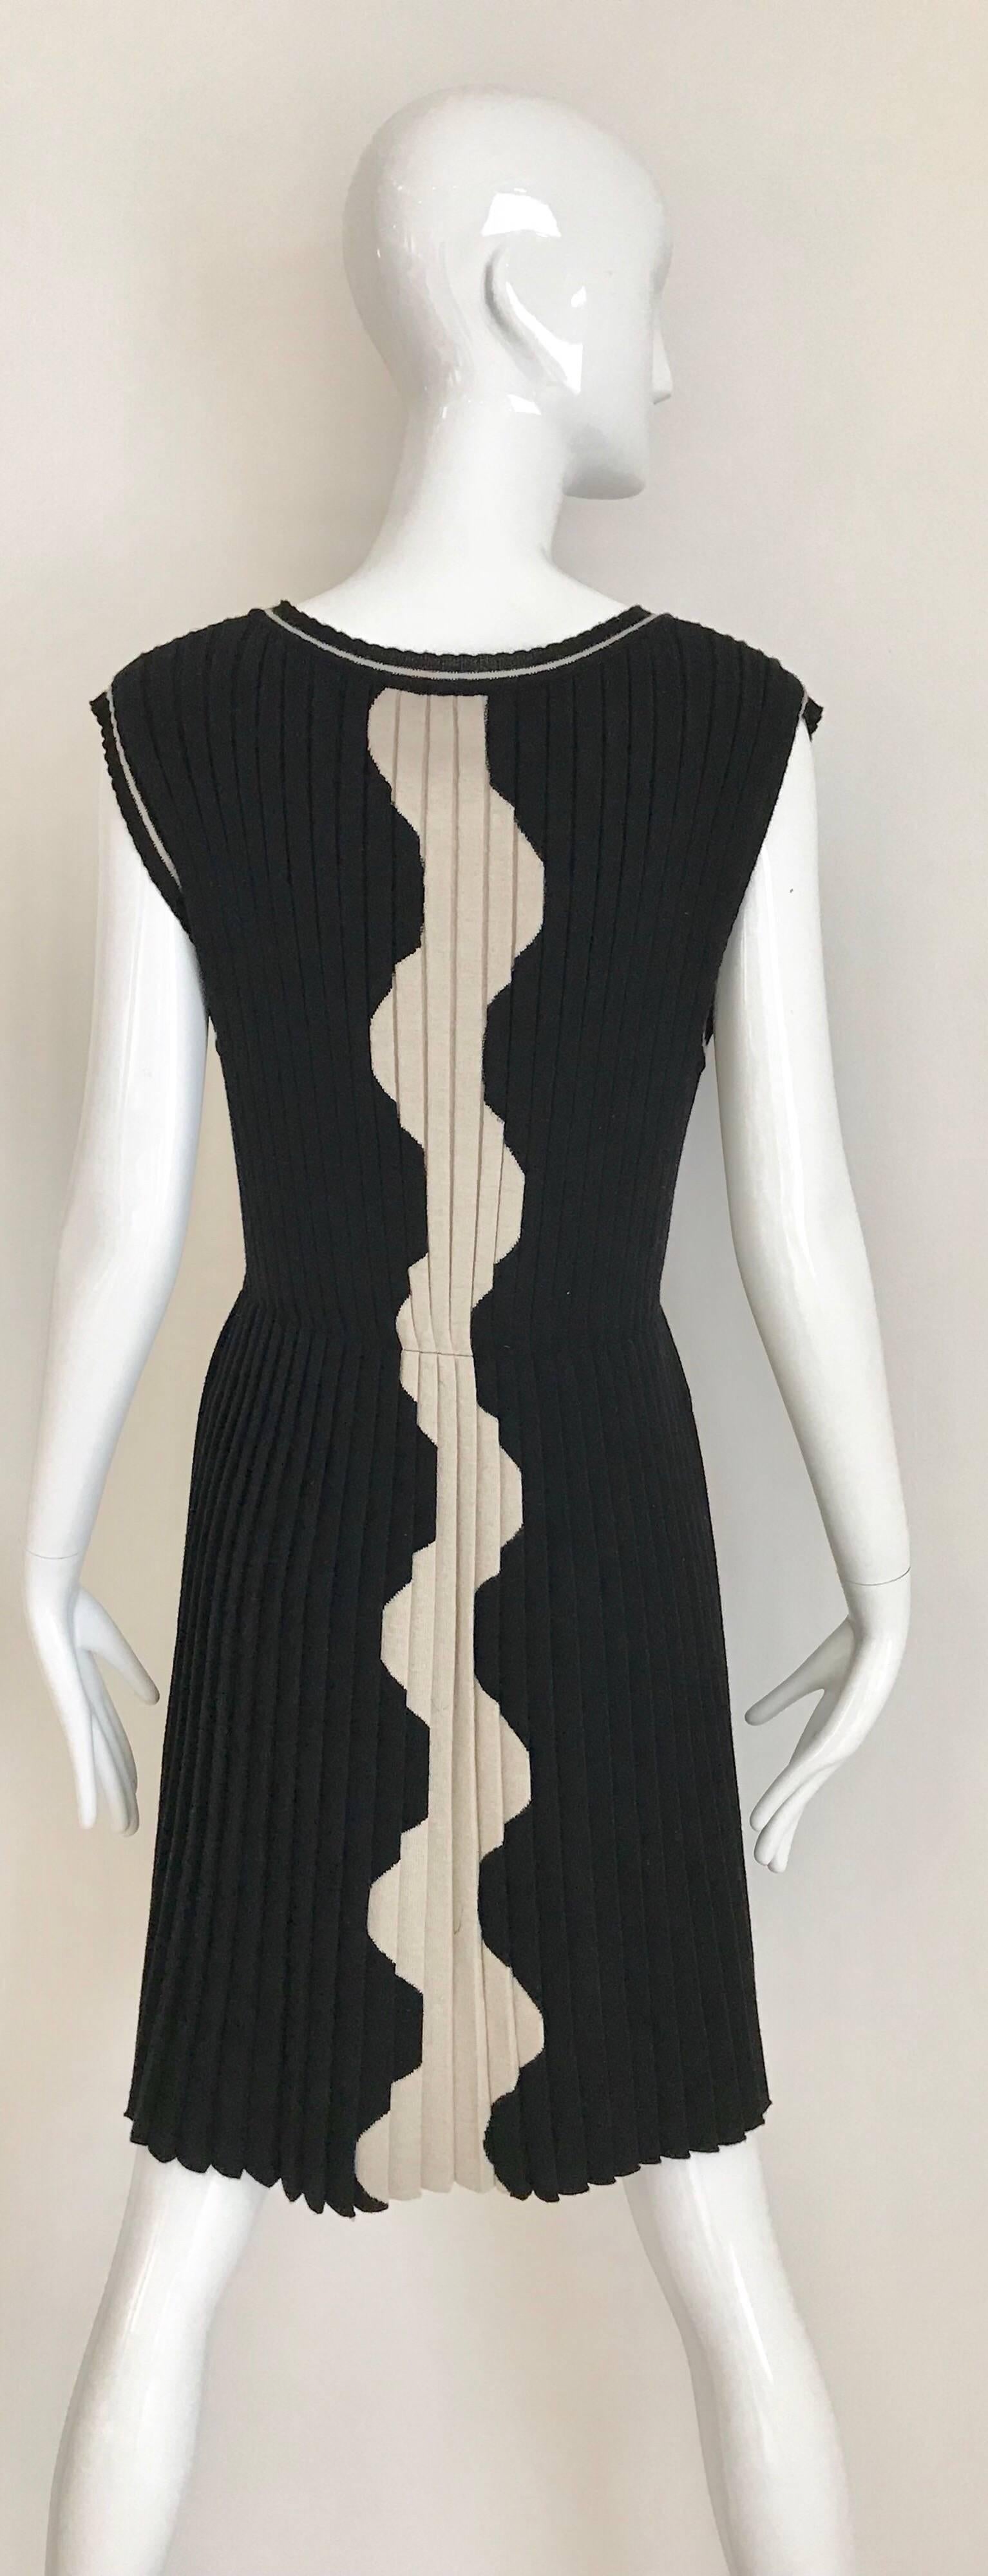 Women's Chanel Black and Creme Knit Dress For Sale